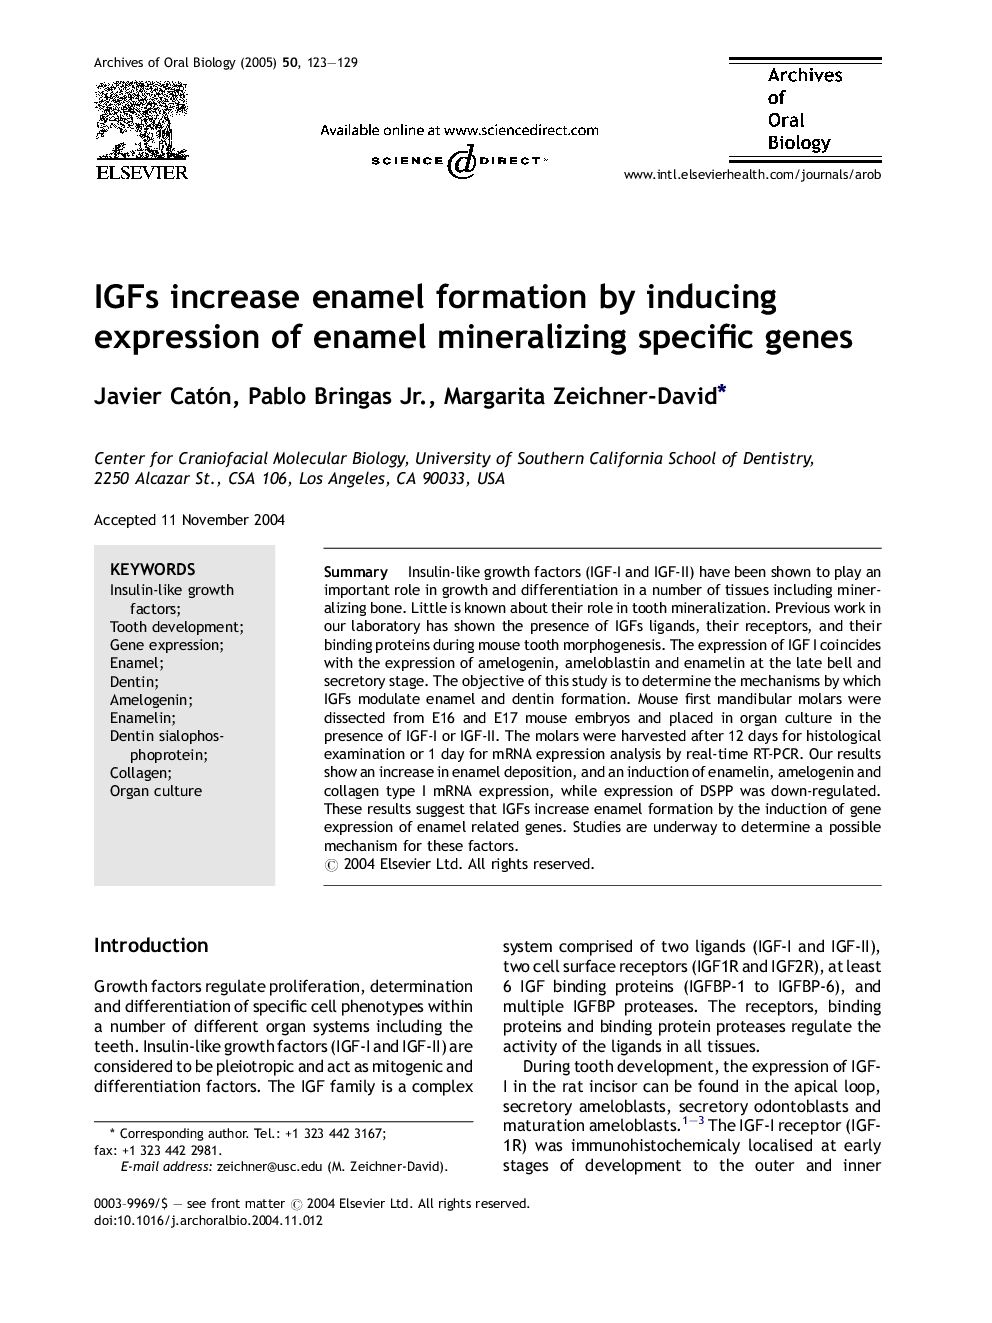 IGFs increase enamel formation by inducing expression of enamel mineralizing specific genes